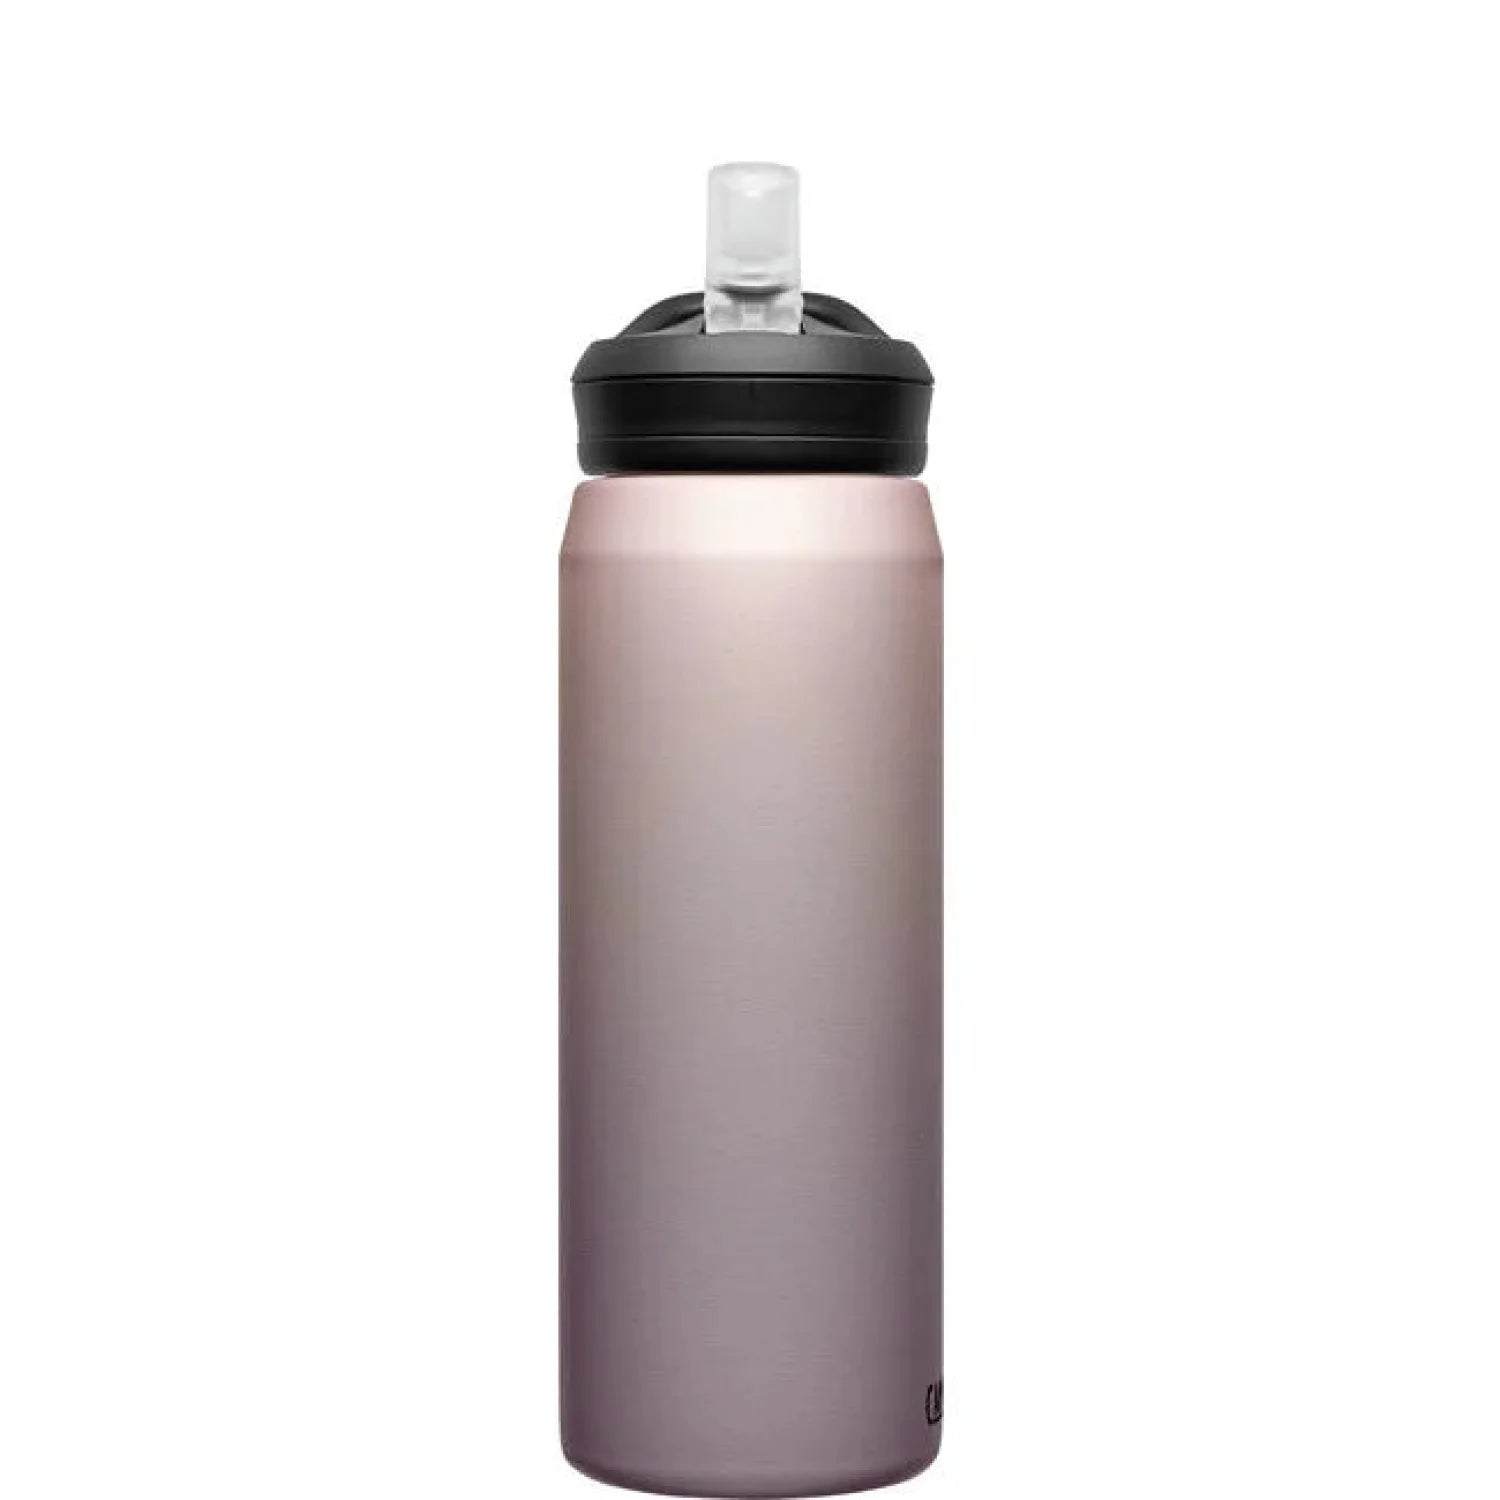 Camelbak 25oz. Eddy Stainless Steel Water Bottle in Rose Gold Sky. Stainless Steel body construction with BPA Free Lid and Eddy Bite Valve. Front View.